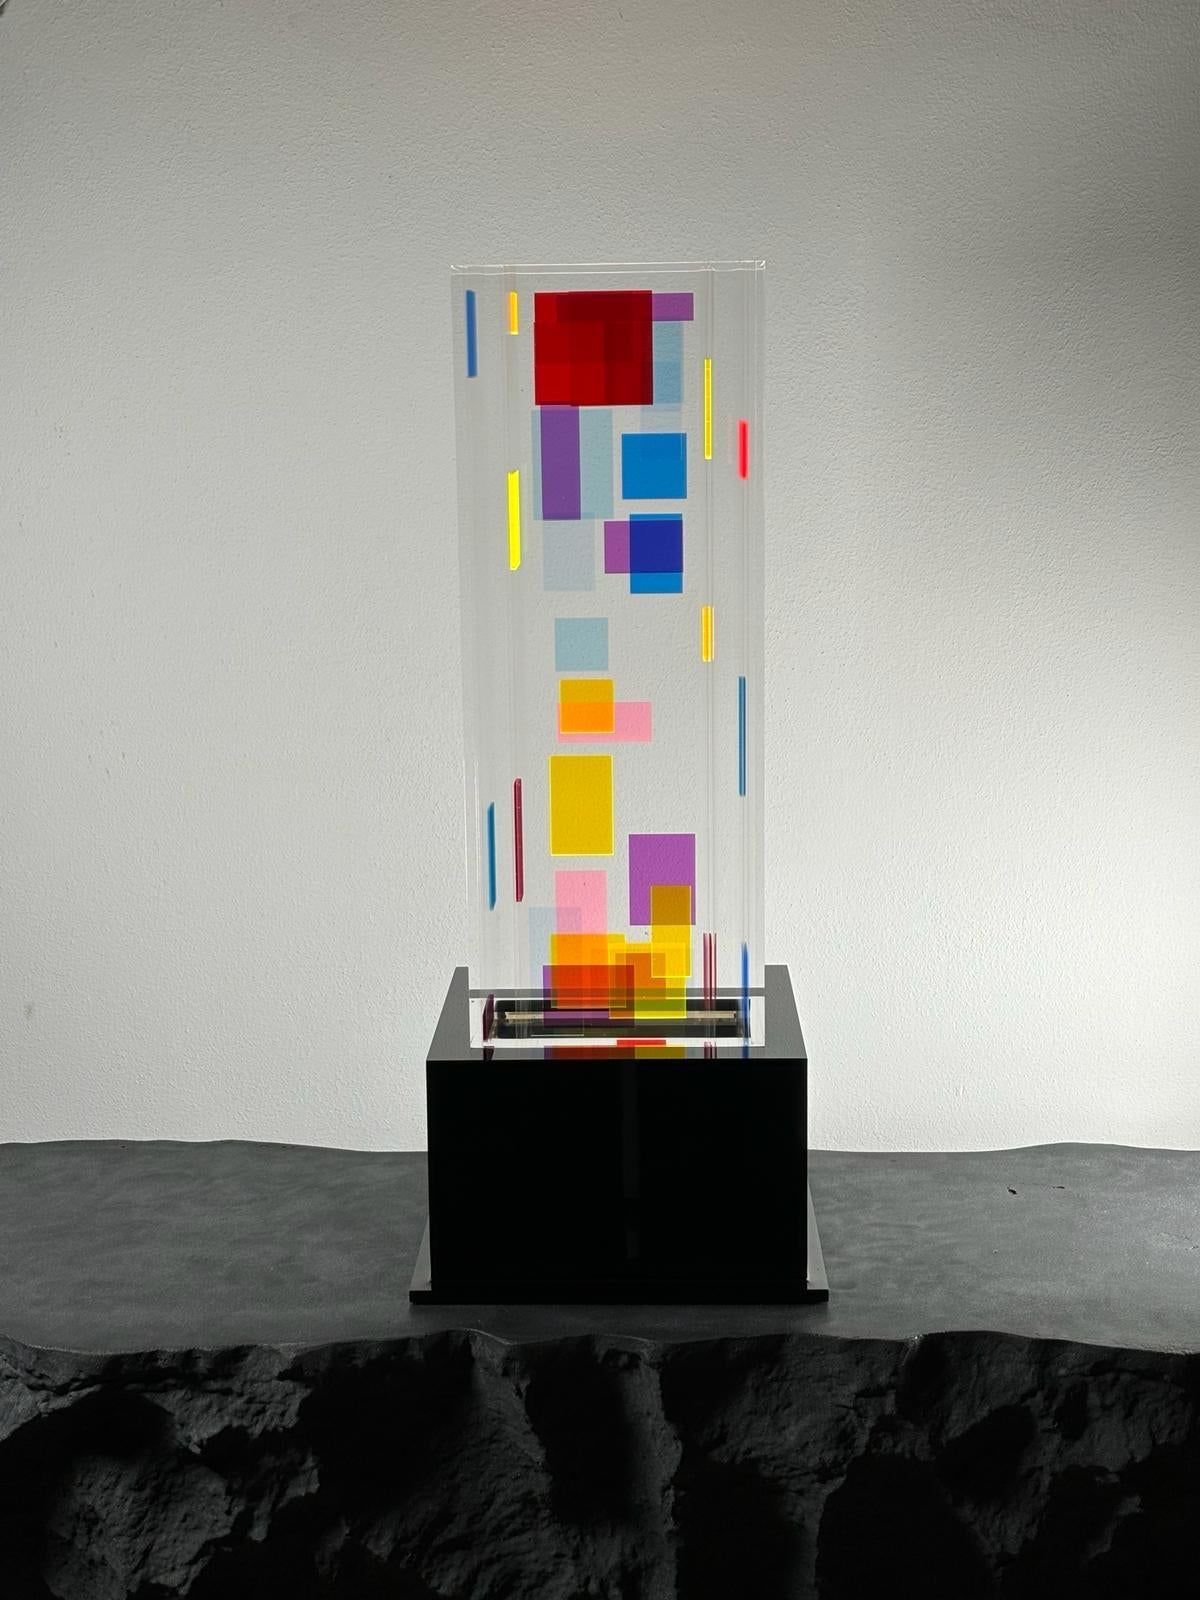 Table Lamp Plexiglass DNA model designed by Studio Superego for Superego Editions. 
 
Biography
Superego editions was born in 2006, performing a constant activity of research in decorative arts by offering both contemporary and vintage works,